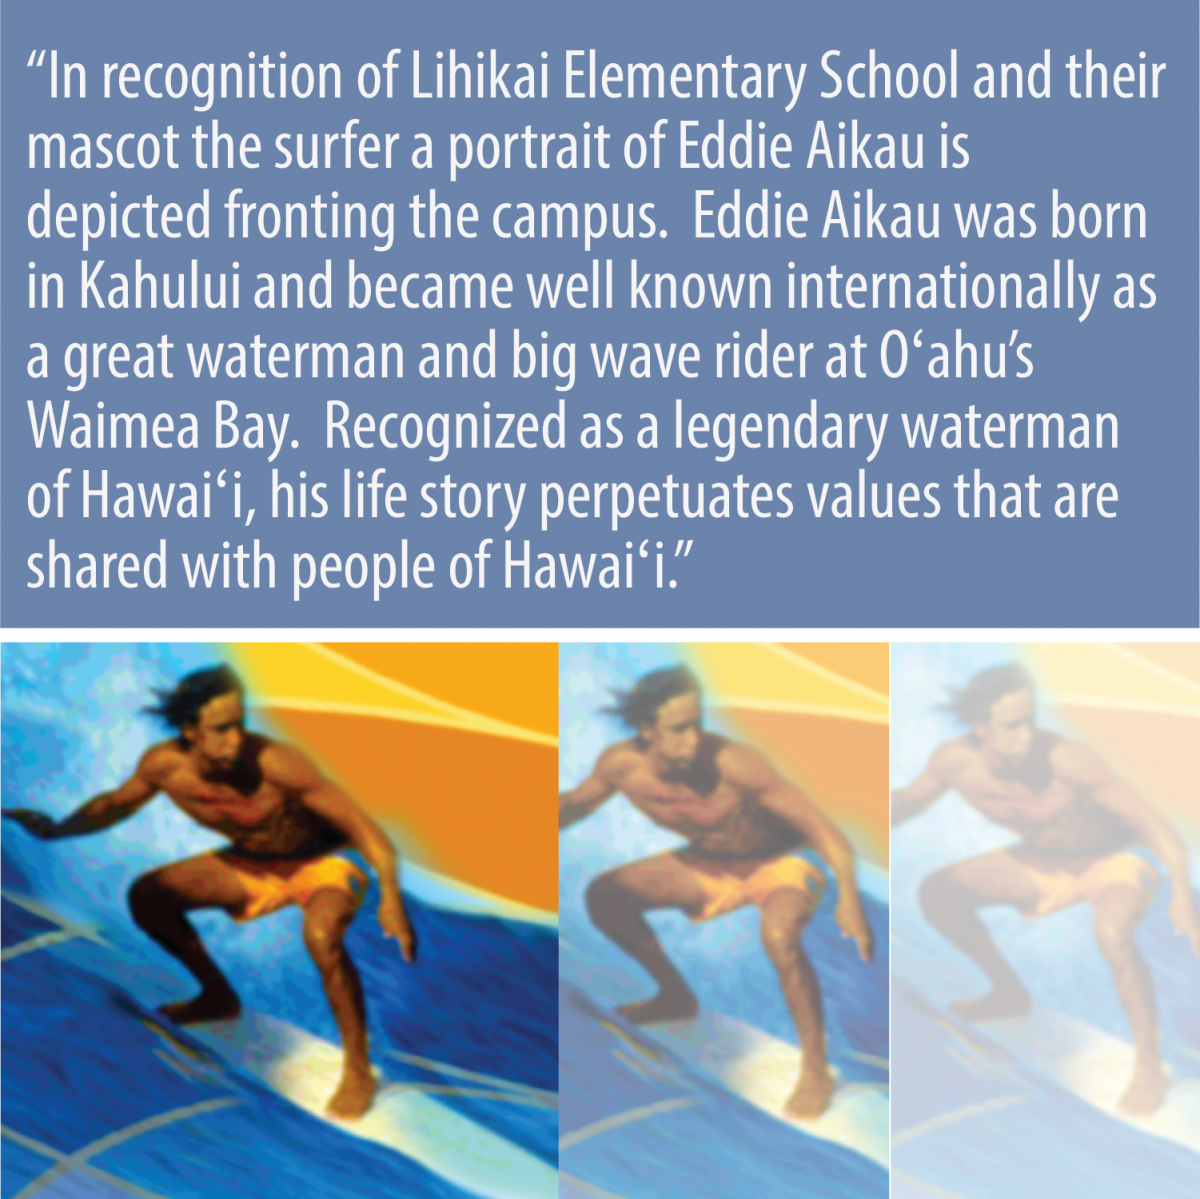 In recognition of Lihikai Elementary School and their mascot the surfer a portrait of Eddie Aikau is depicted fronting the campus.  Eddi Aikau was bork in Kahului and became well known internationally as a great waterman and big wave rider at O'ahu's Waimea Bay.  Recognized as a legendary waterman of Hawai'i, his life story perpetuates values that are shared with people of Hawai'i.